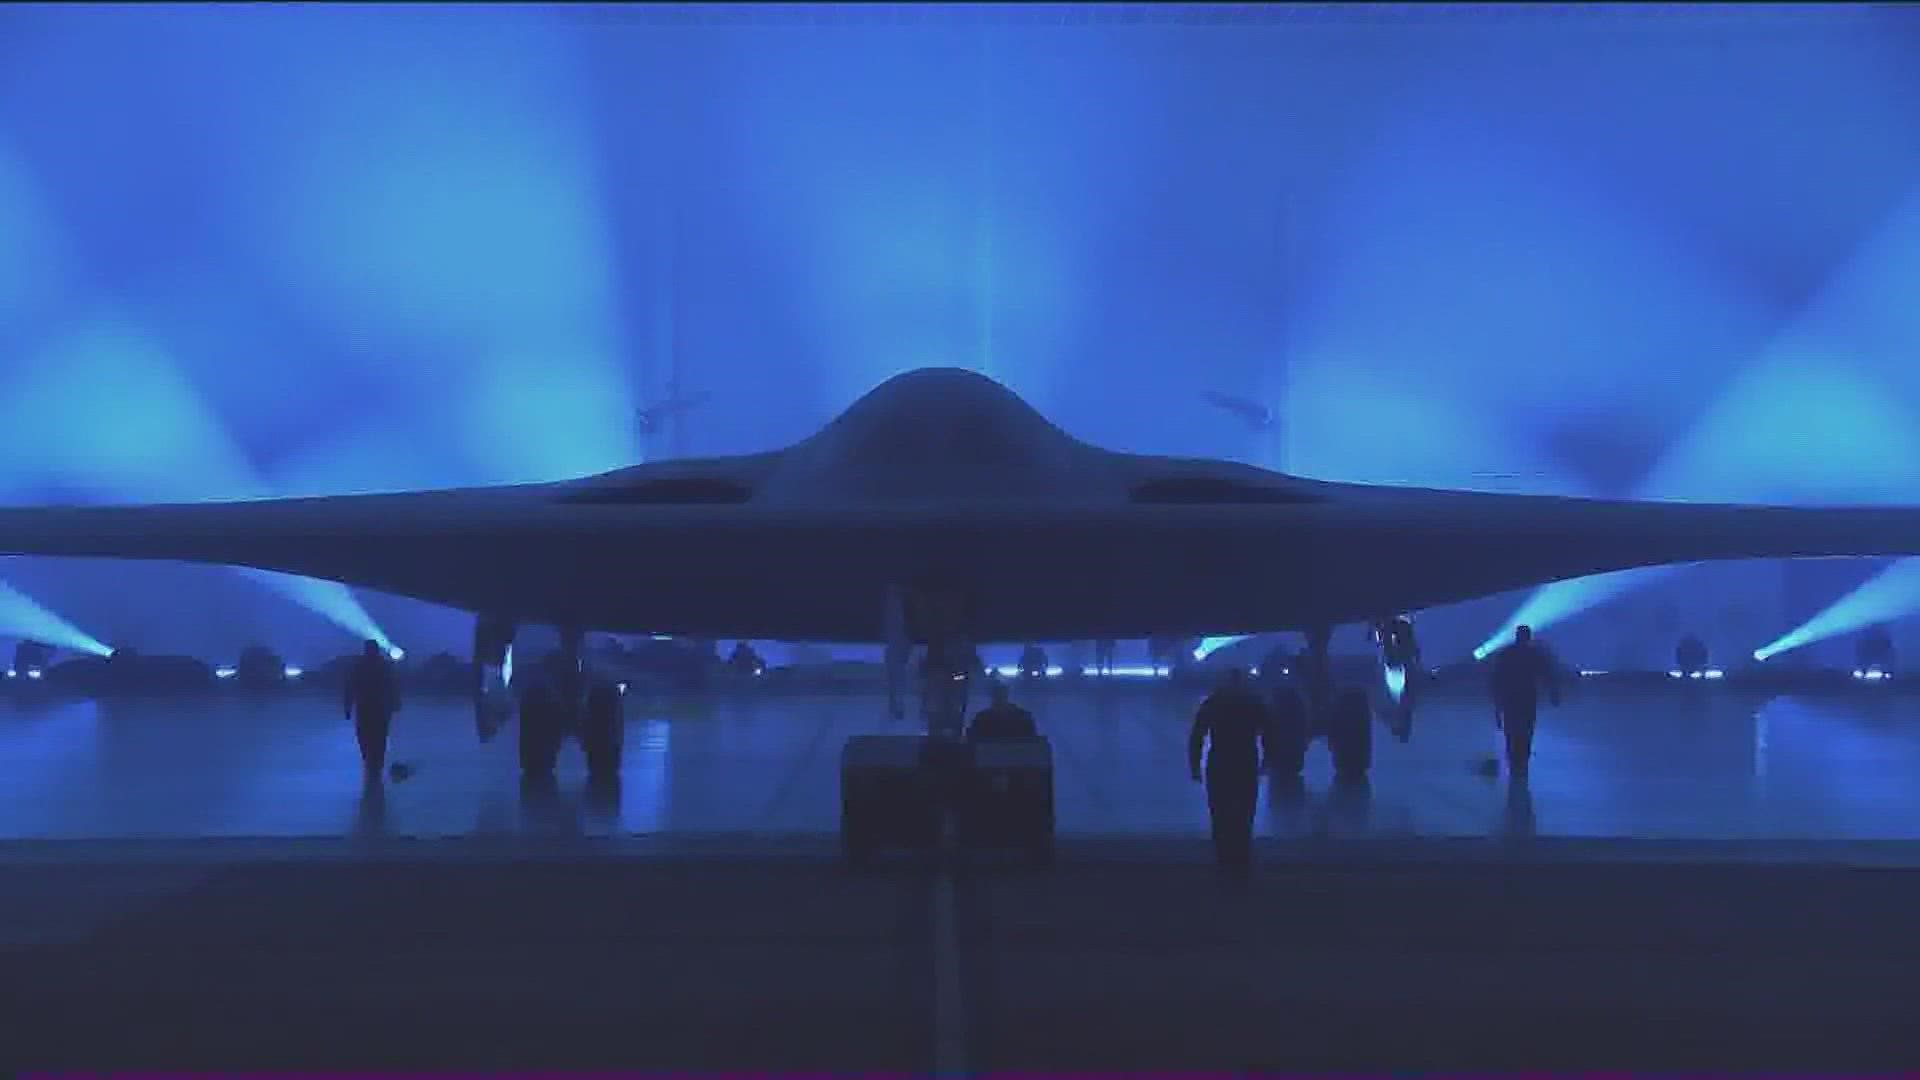 The B-21 is named in honor of airmen who carried out the surprise WW II Doolittle raid.